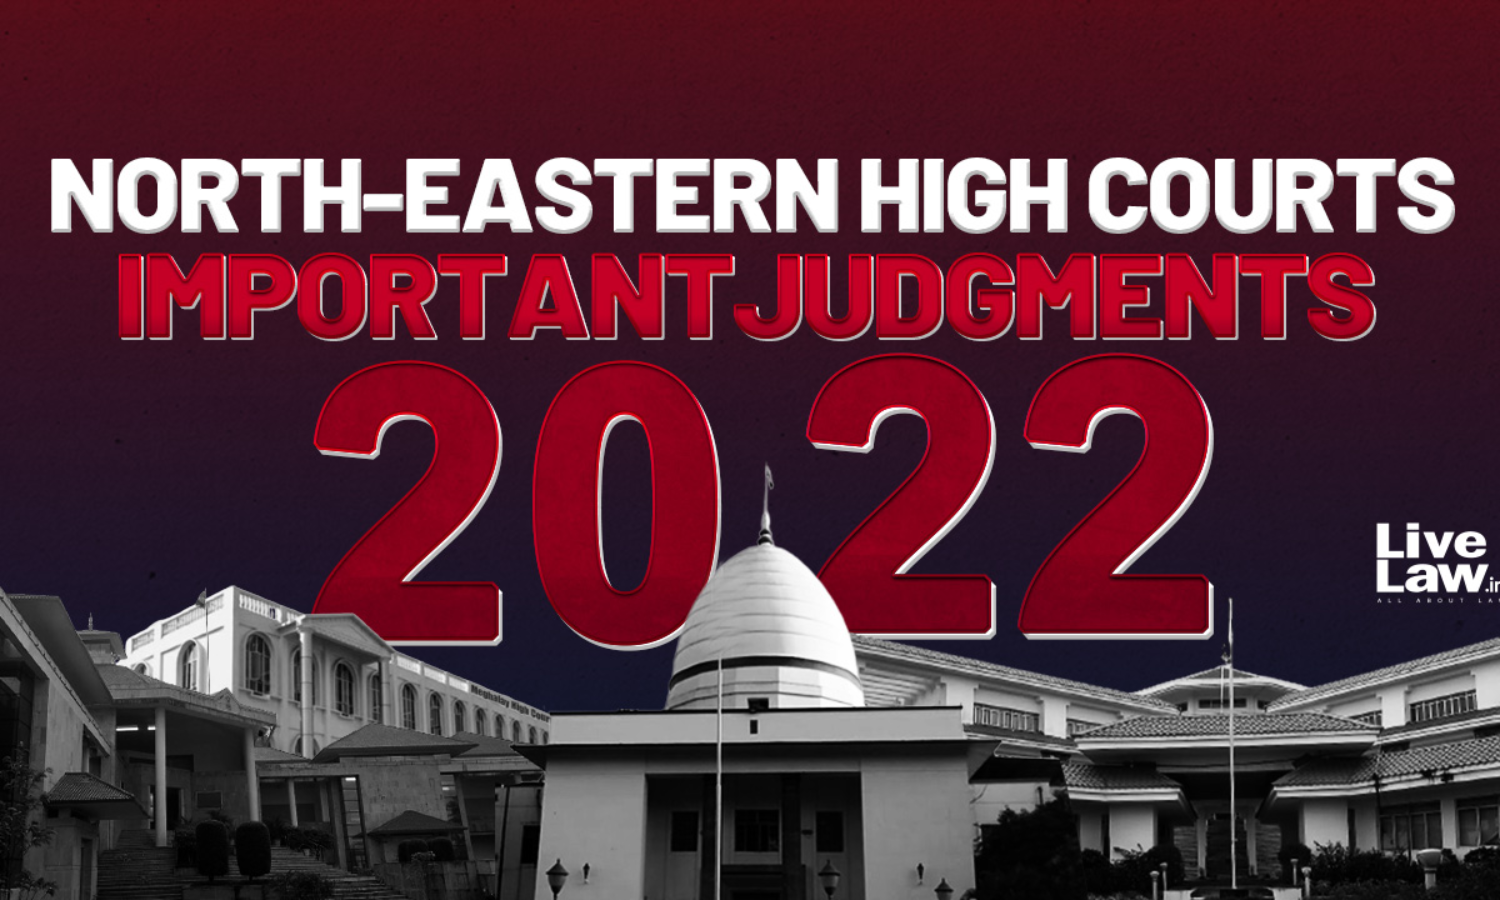 Assames Xxx Repa Video - Best Of 2022- Important Judgments From North East High Courts